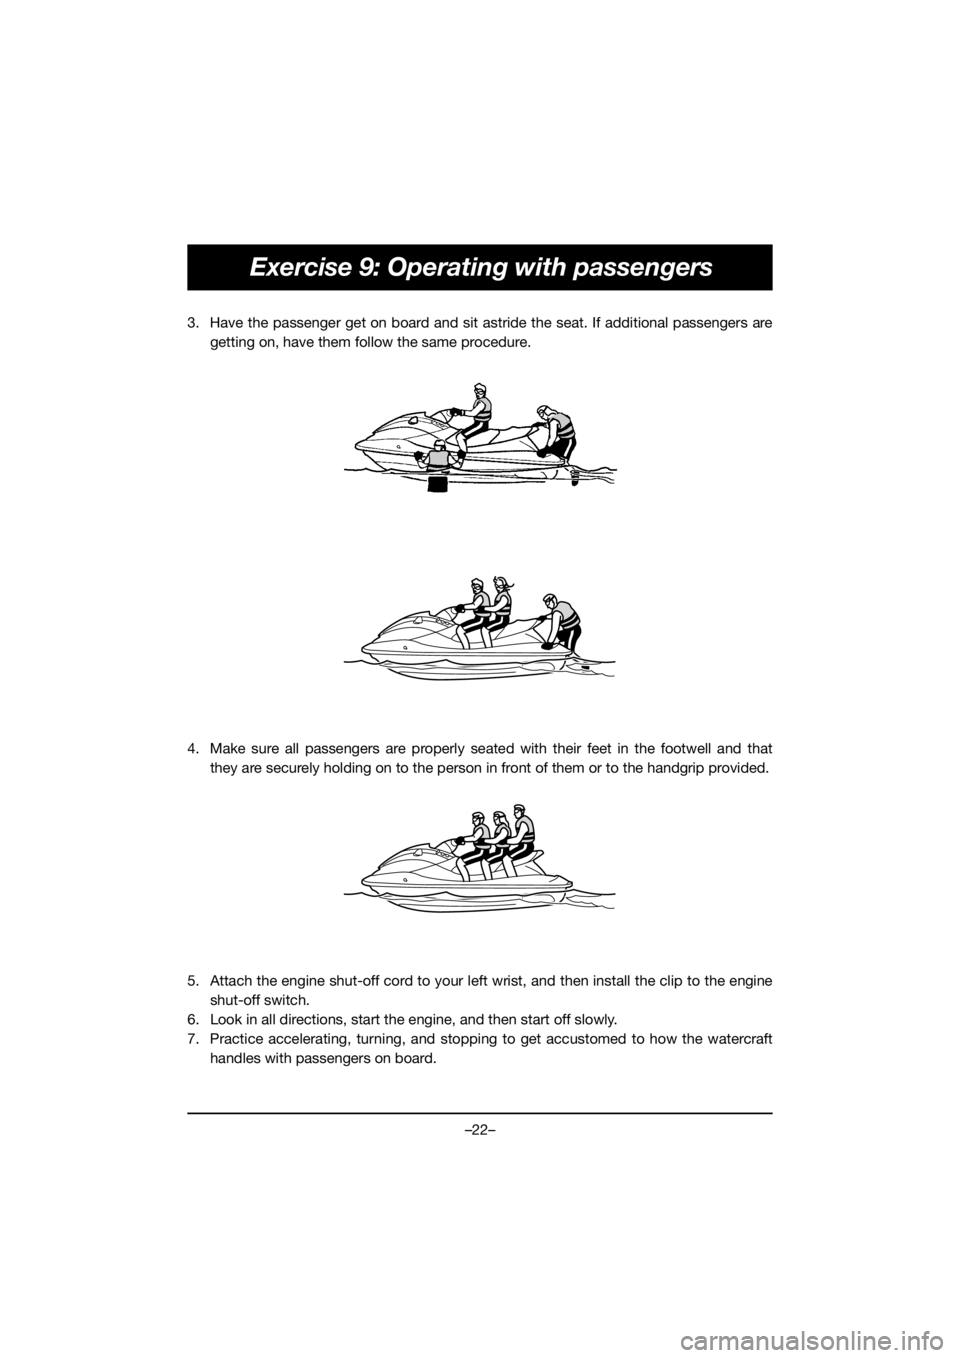 YAMAHA EXR 2020  Bruksanvisningar (in Swedish) –22–
Exercise 9: Operating with passengers
3. Have the passenger get on board and sit astride the seat. If additional passengers are
getting on, have them follow the same procedure. 
4. Make sure 